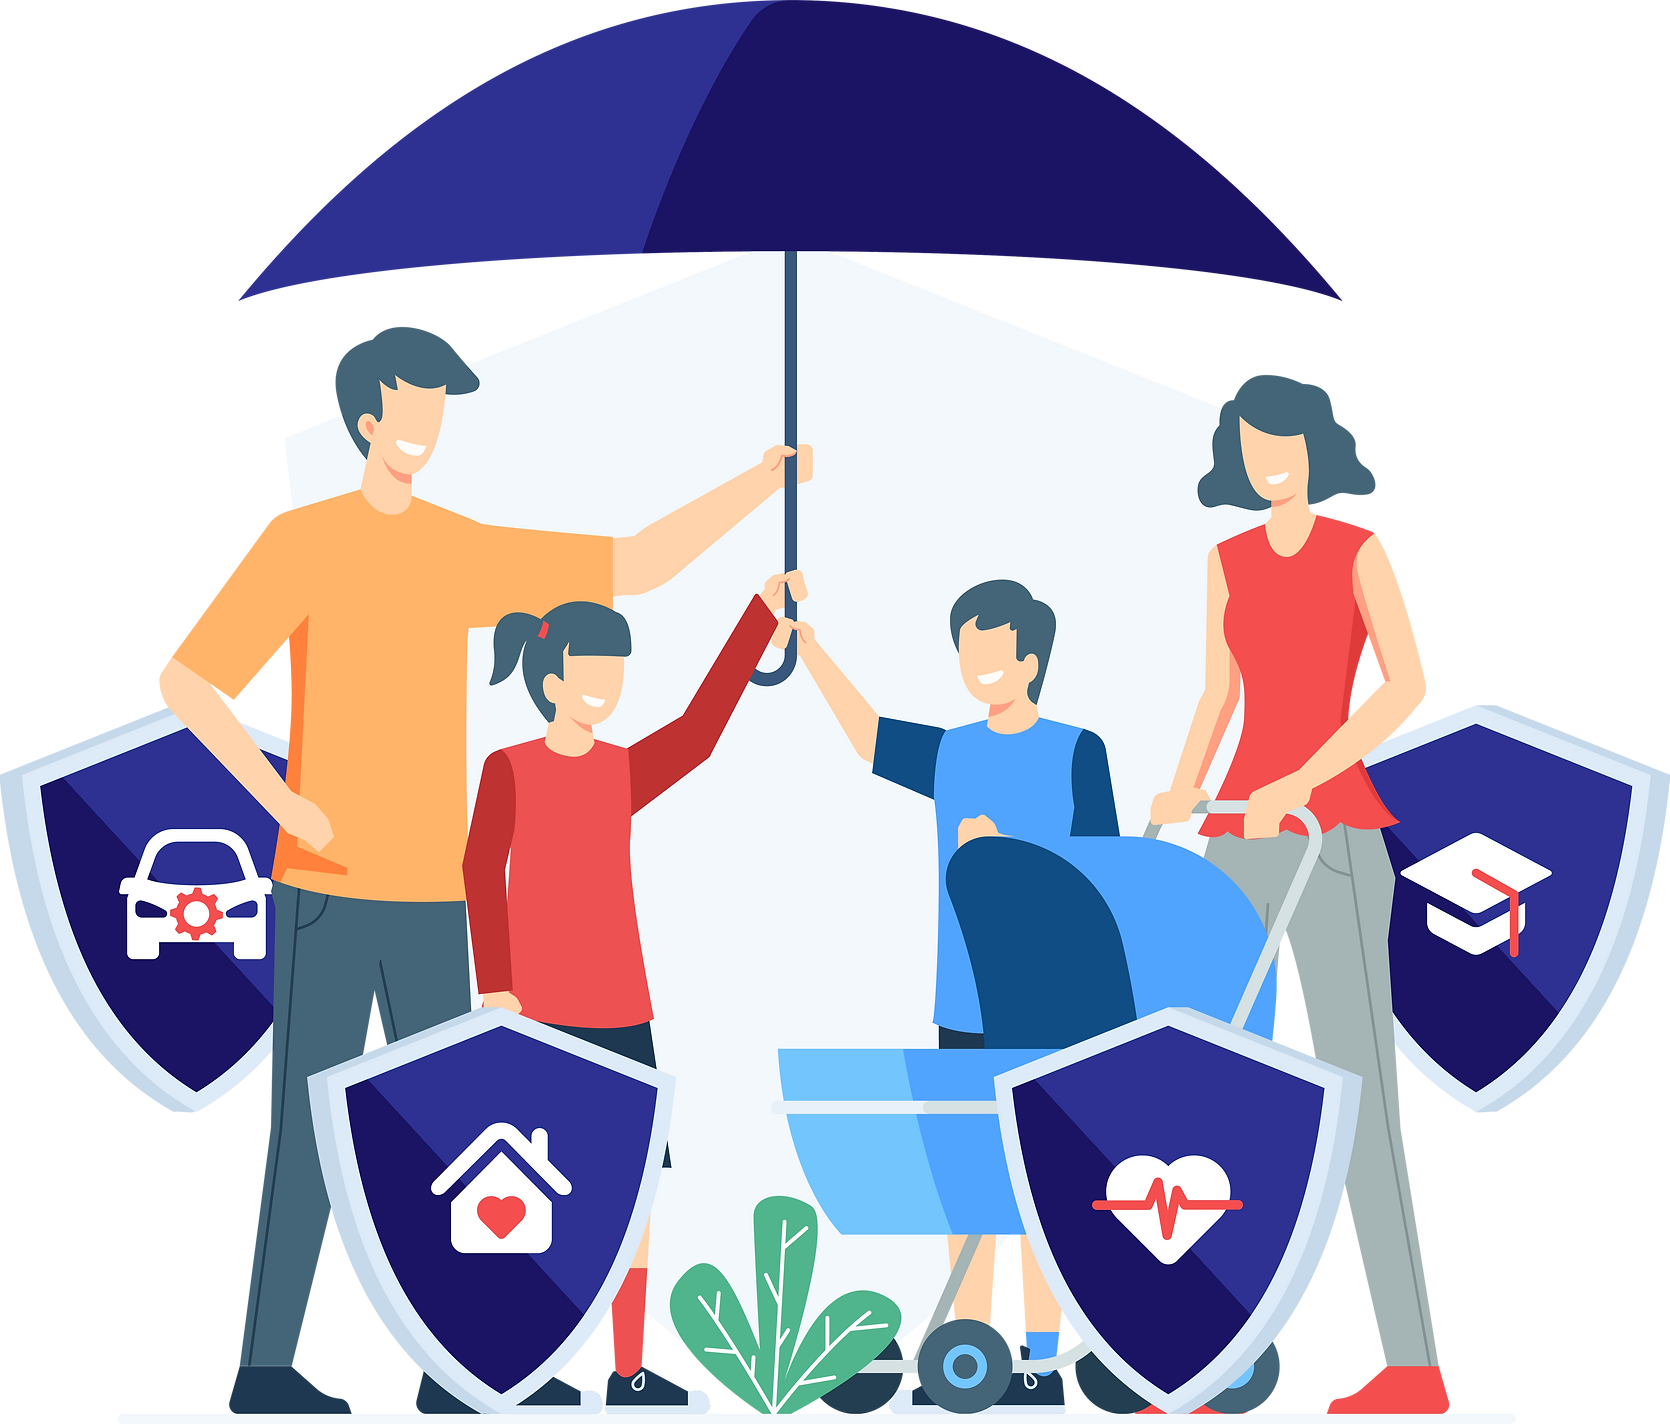 Vector graphic of a family under an umbrella displaying insurance icons for home, life, auto, and umbrella insurance